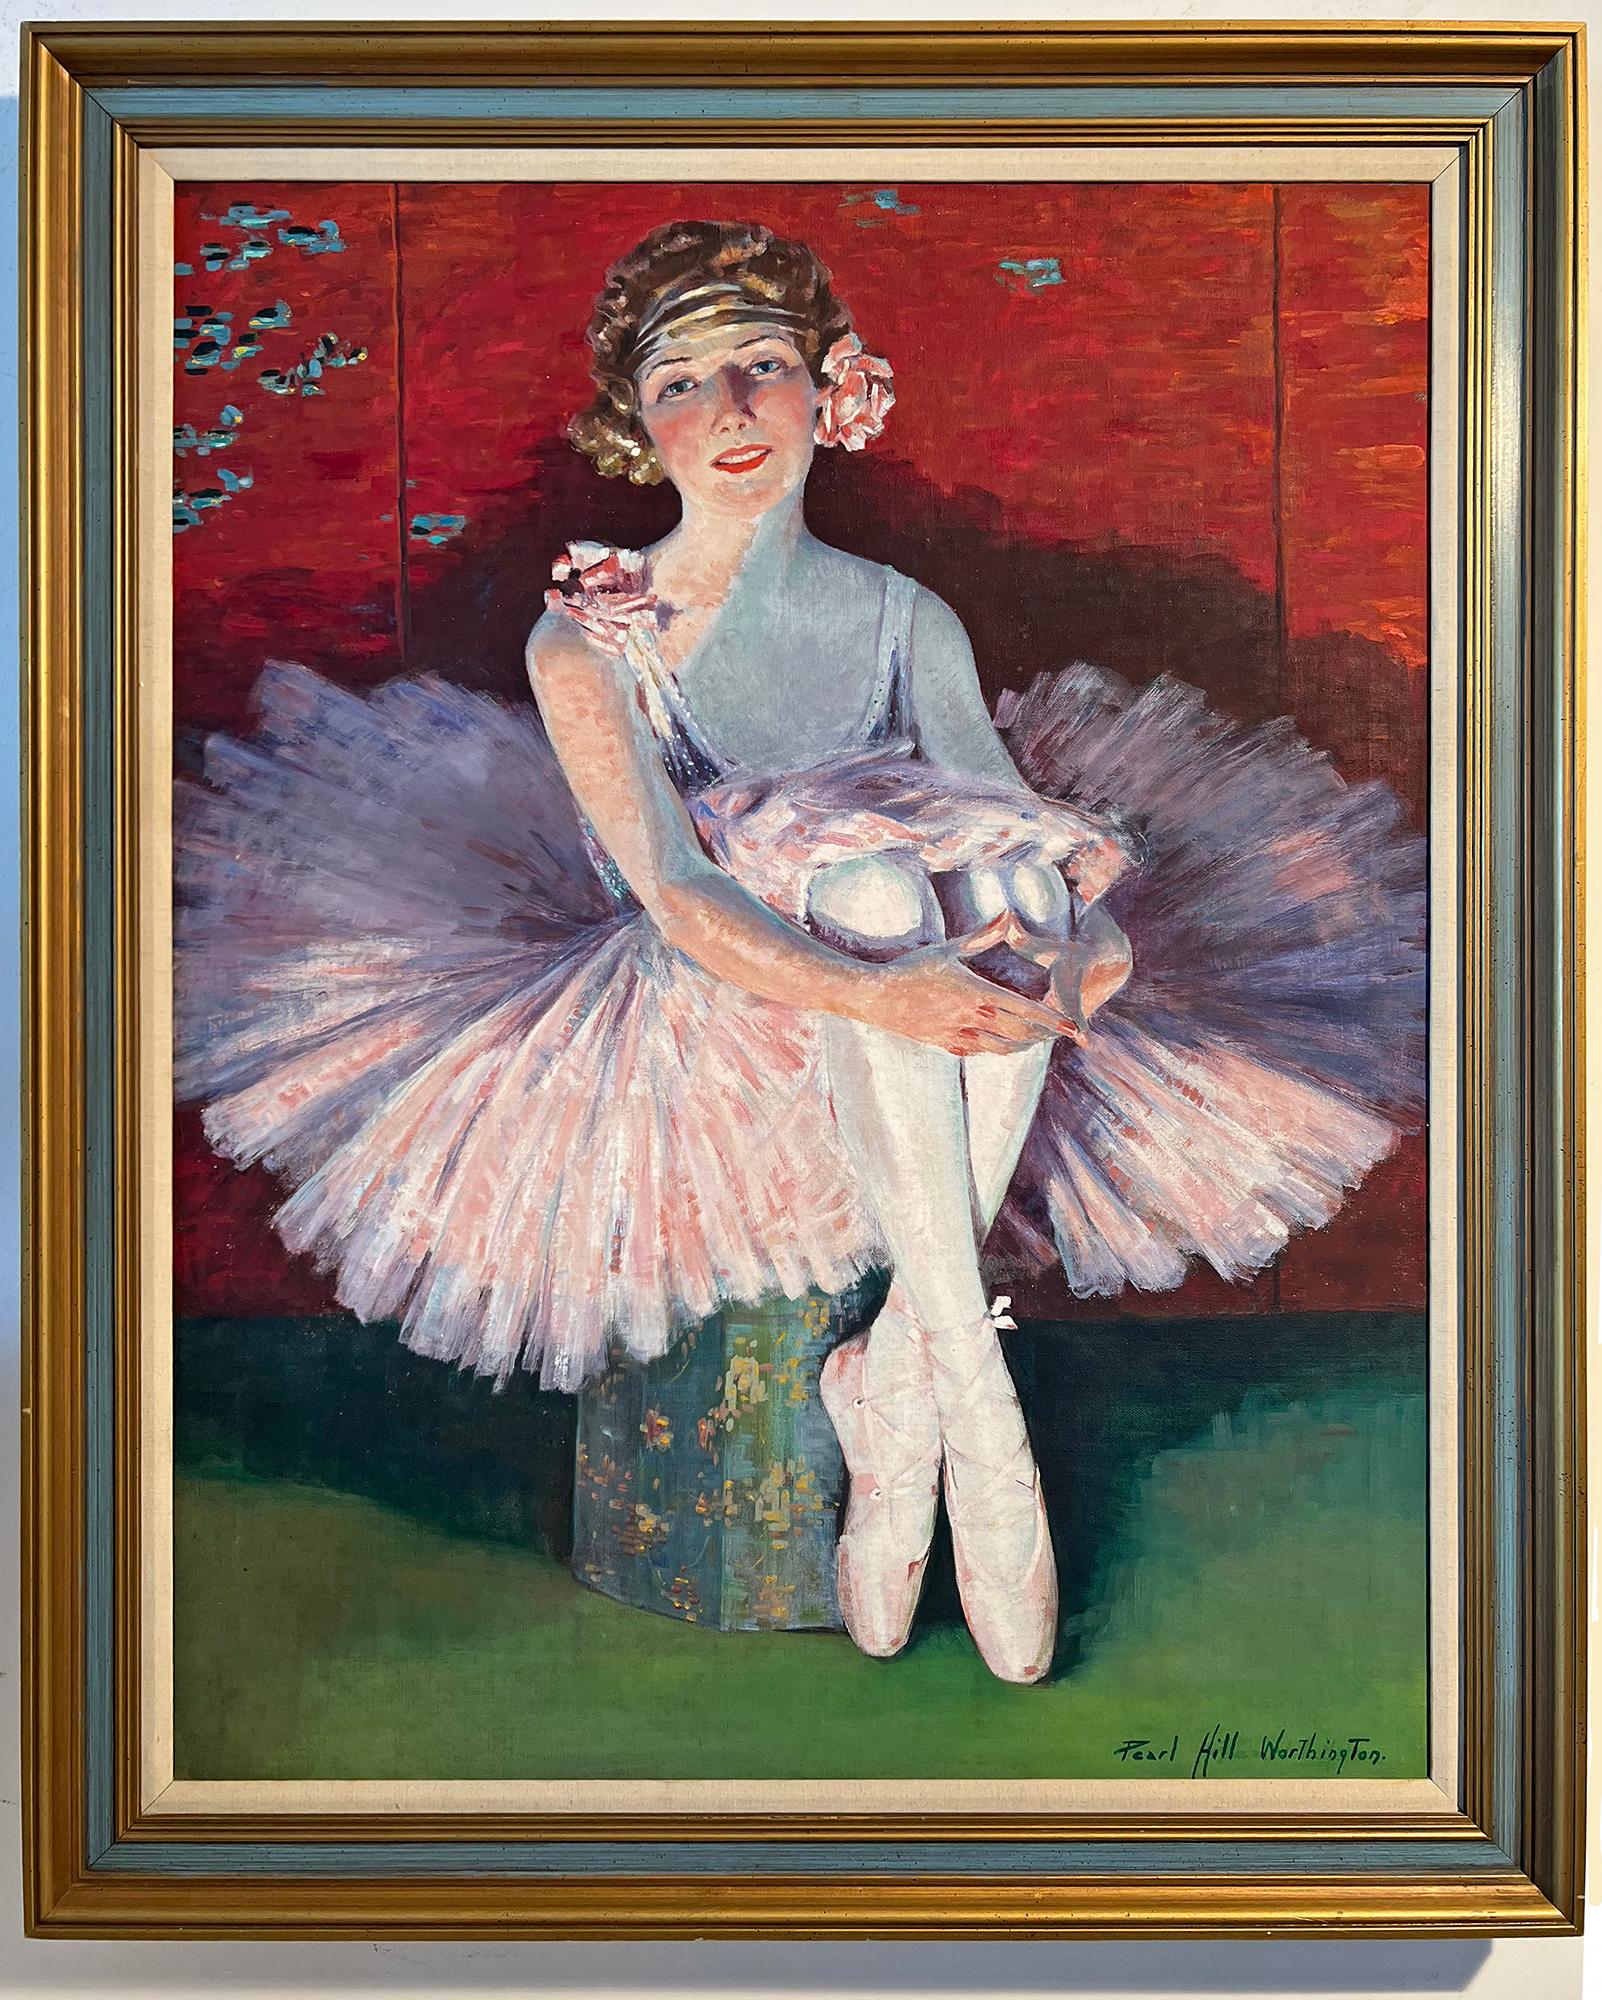 Blond and Blue Eyed Ballerina in Tutu against Chinese Screen - Painting by Pearl Hill Worthington